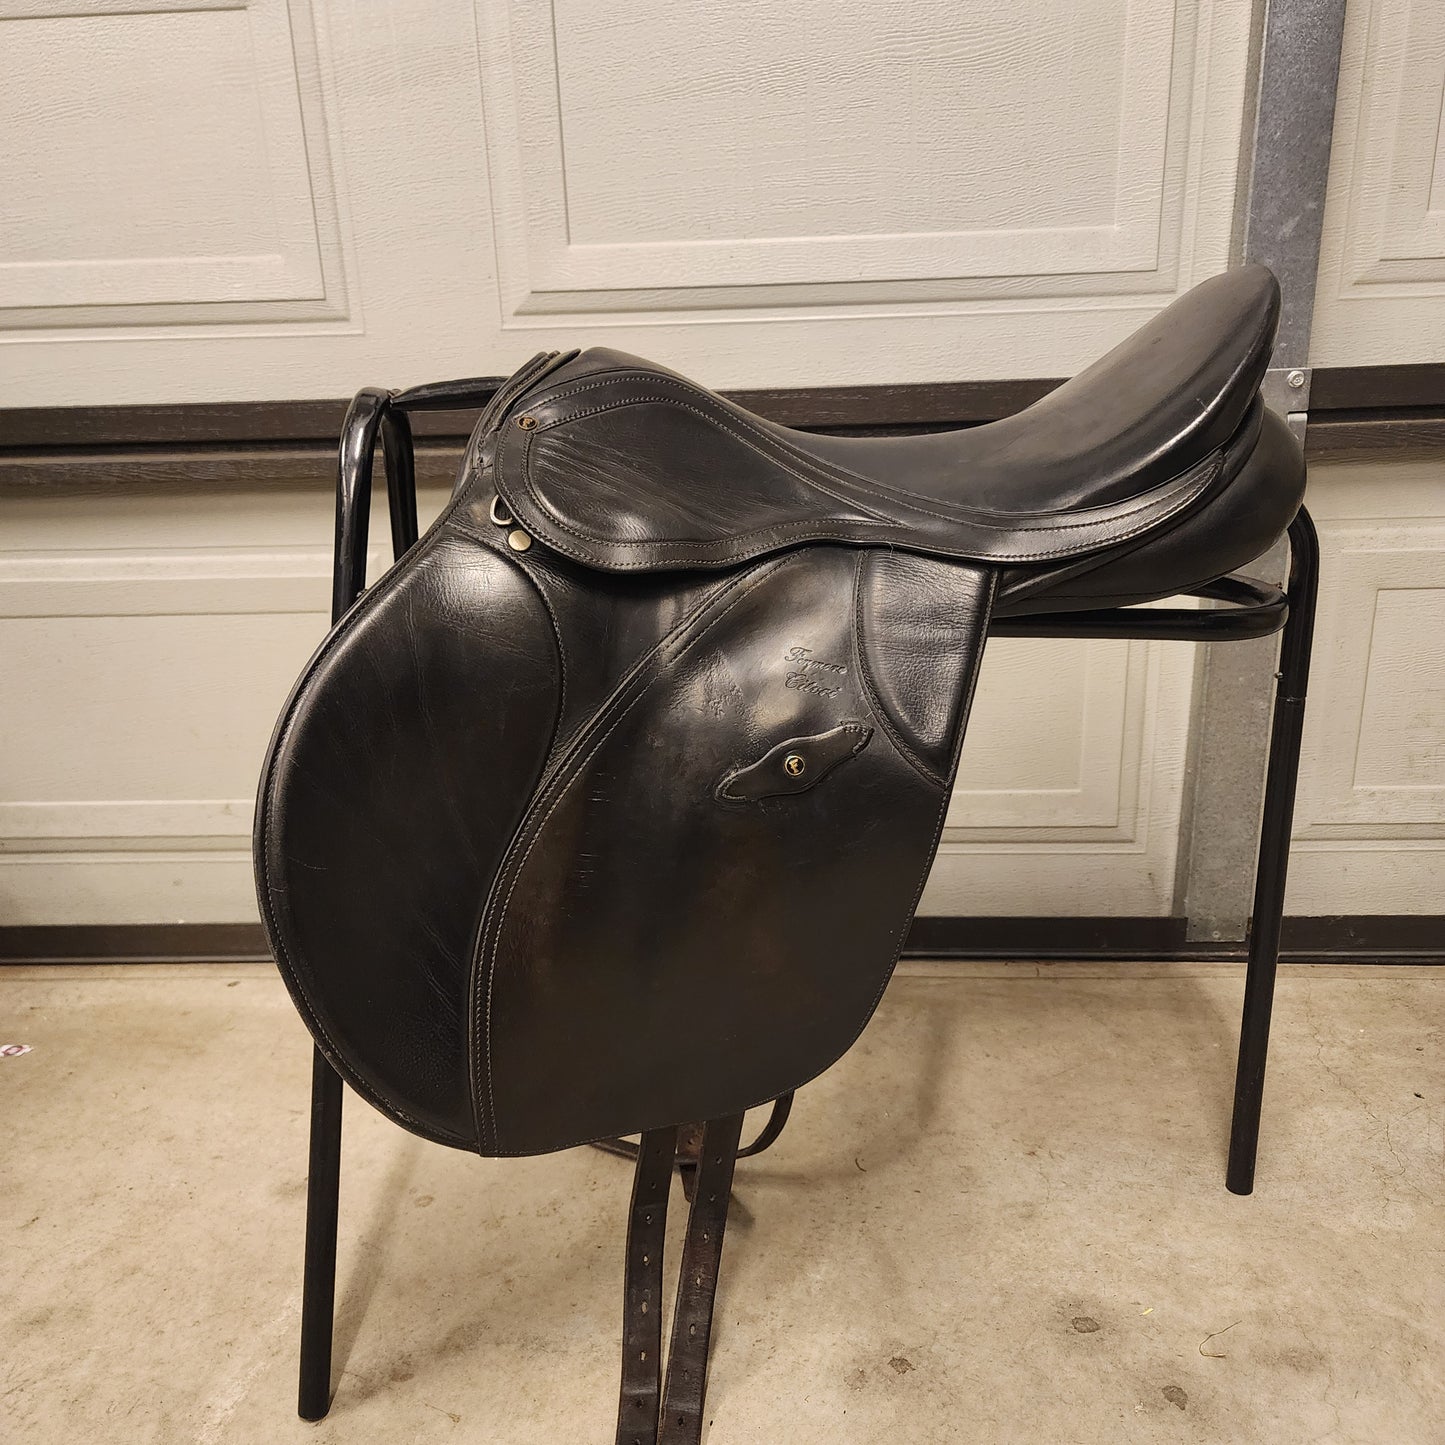 Fenmore Citori black leather GP saddle 18", wide gullet